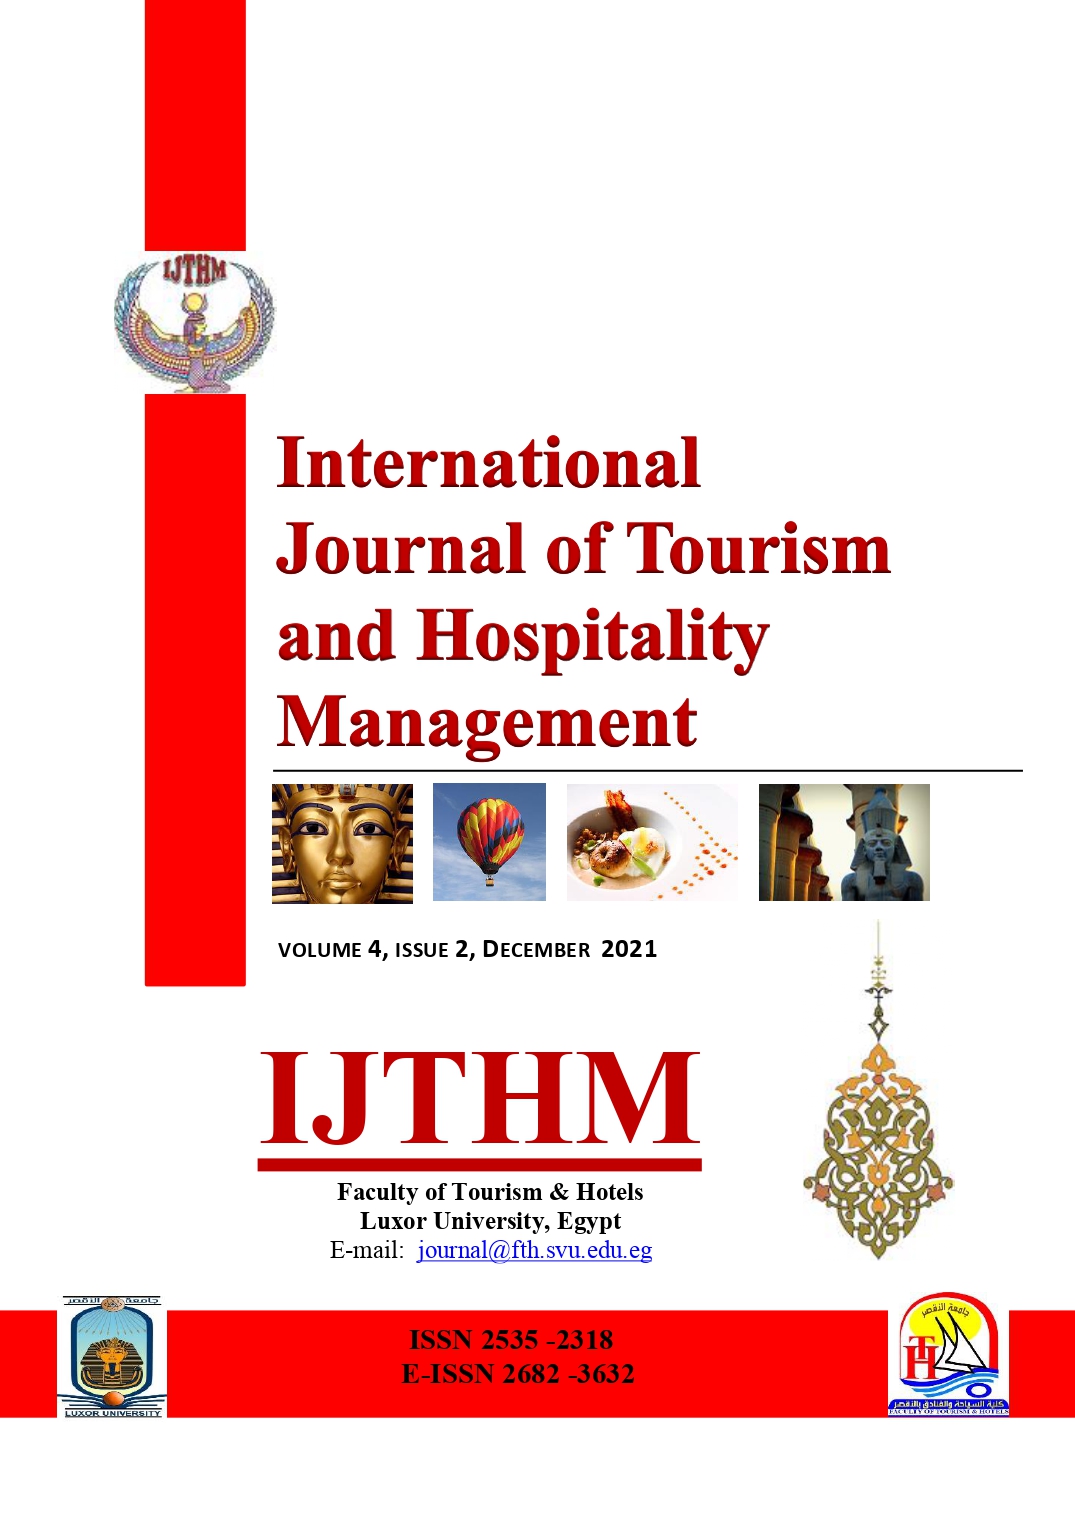 International Journal of Tourism and Hospitality Management